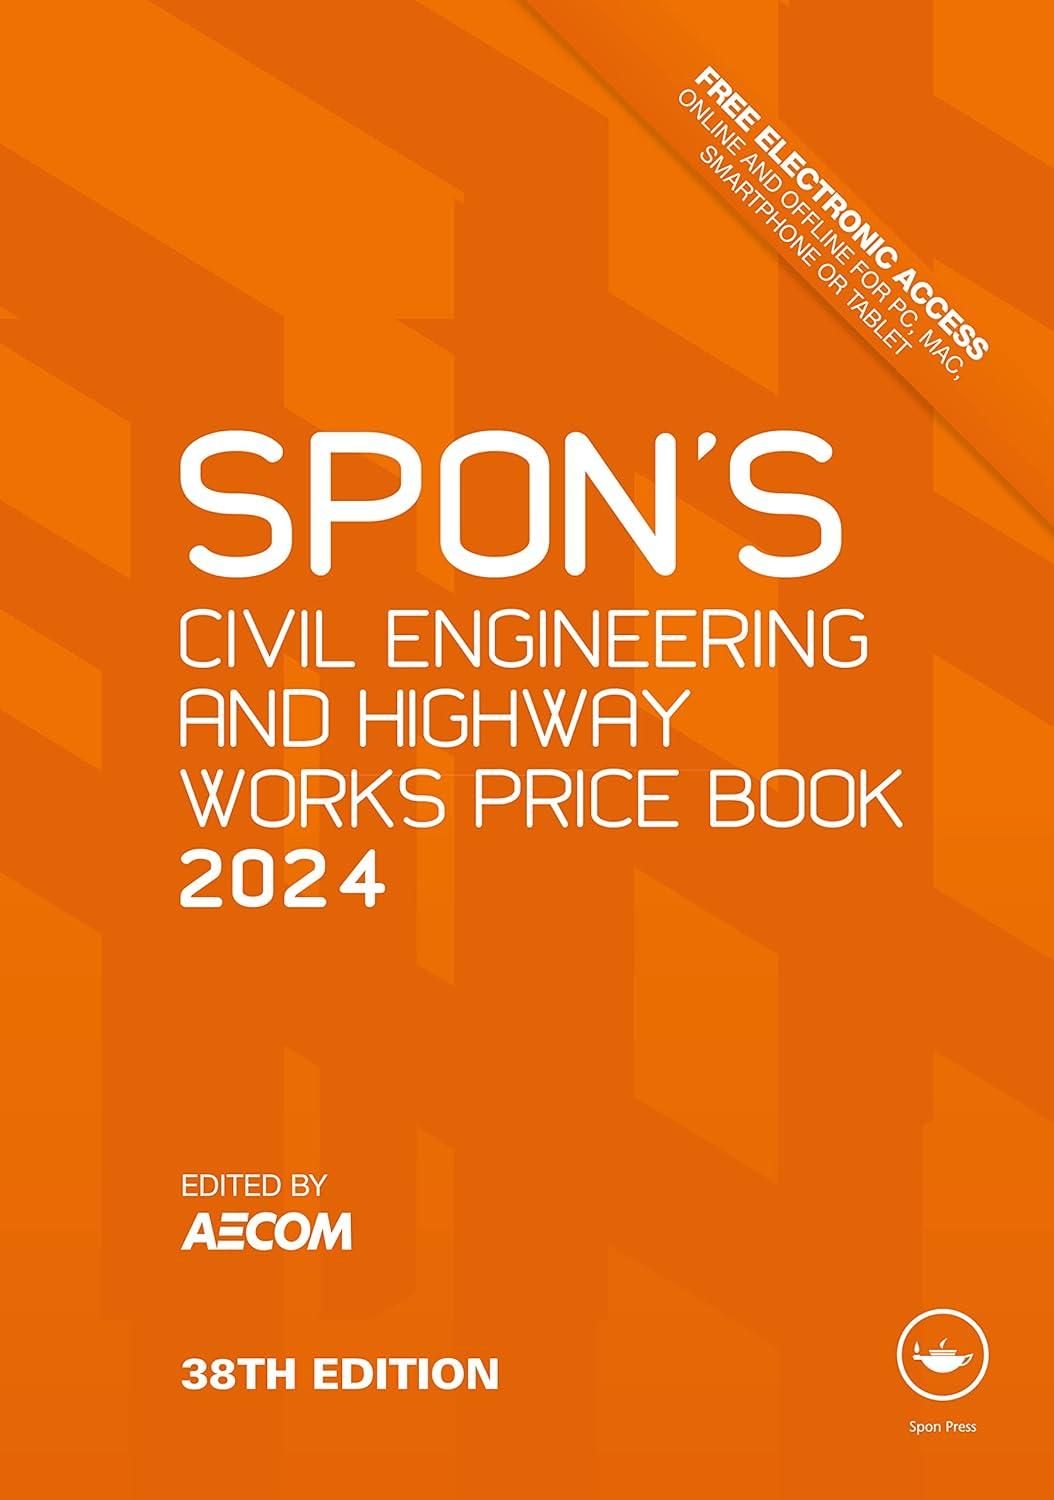 spons civil engineering and highway works price book 2024 38th edition aecom 1032550139, 978-1032550138